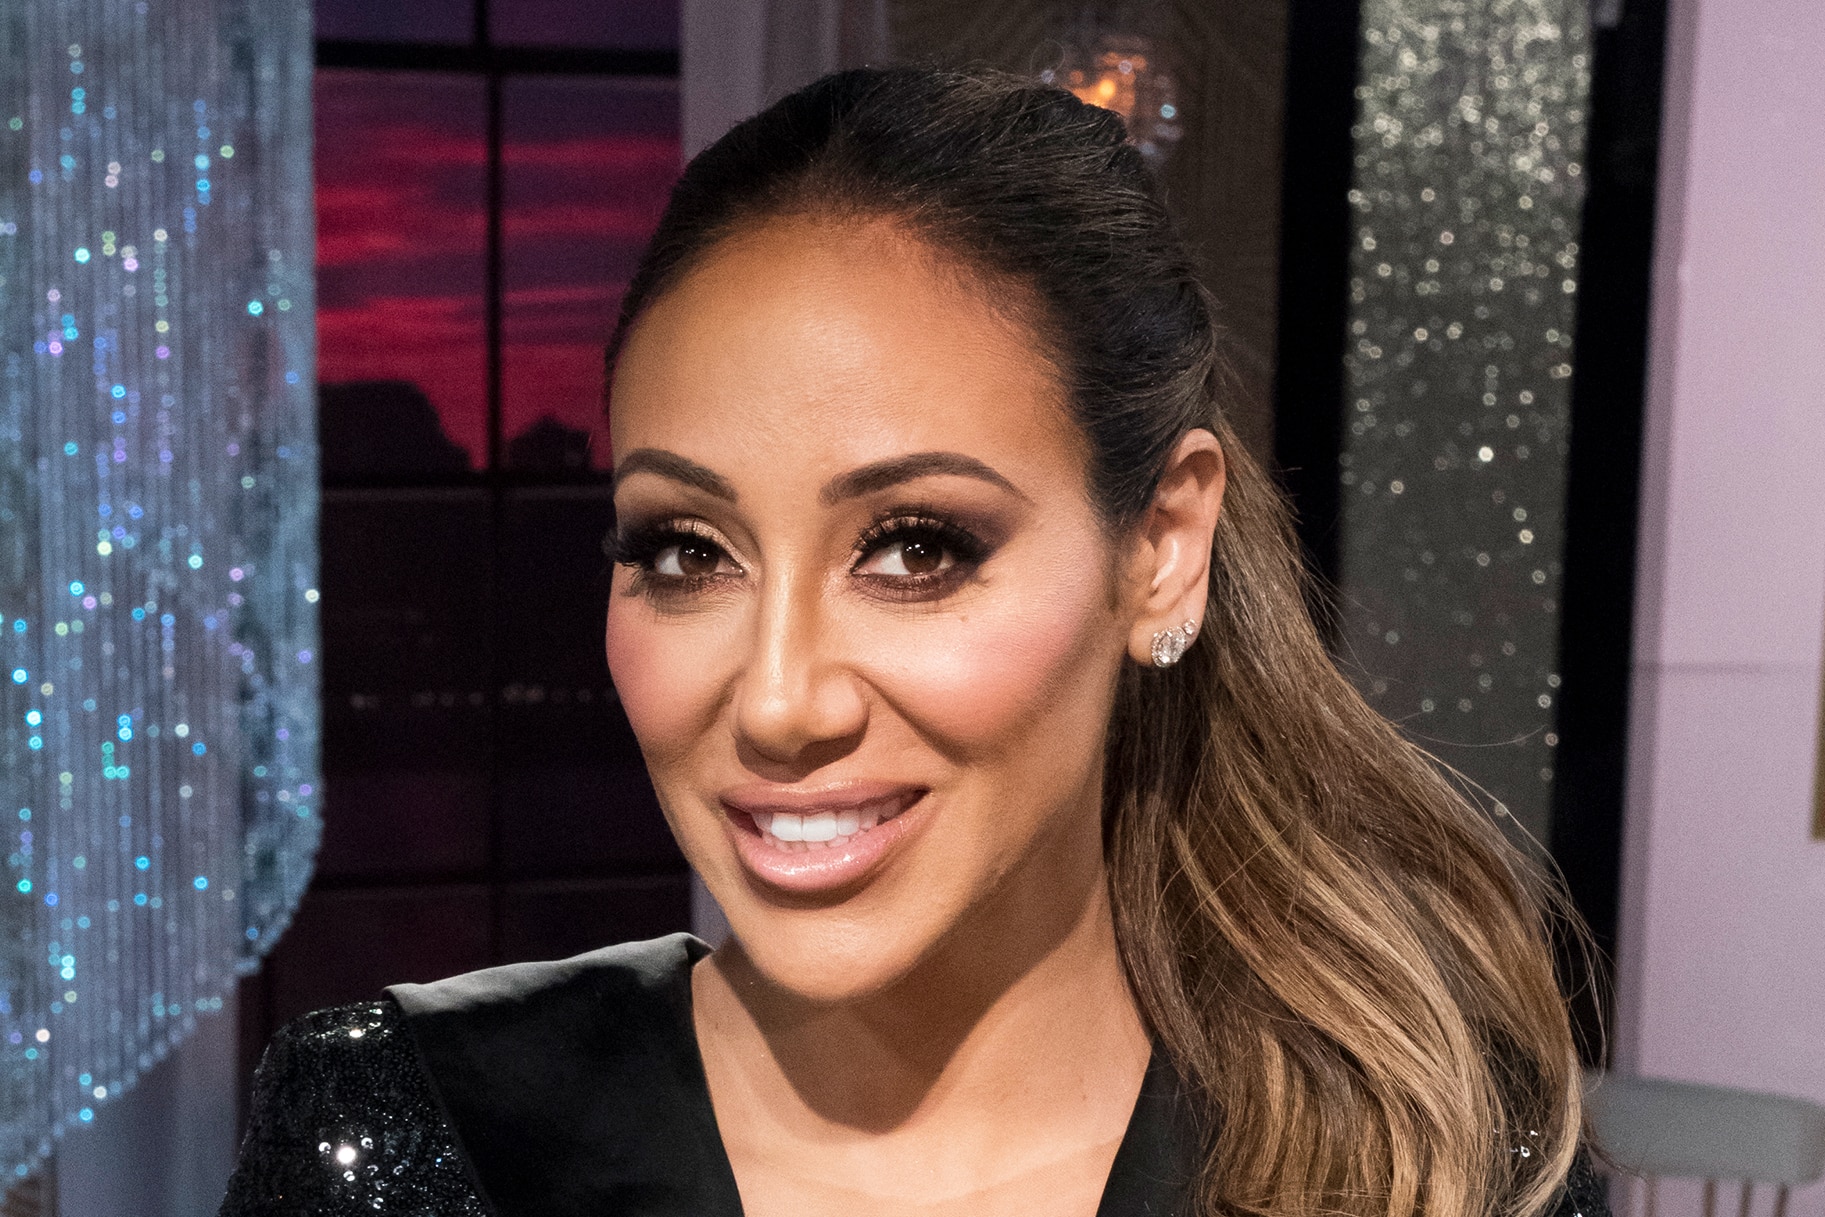 Melissa Gorga | The Real Housewives of New Jersey